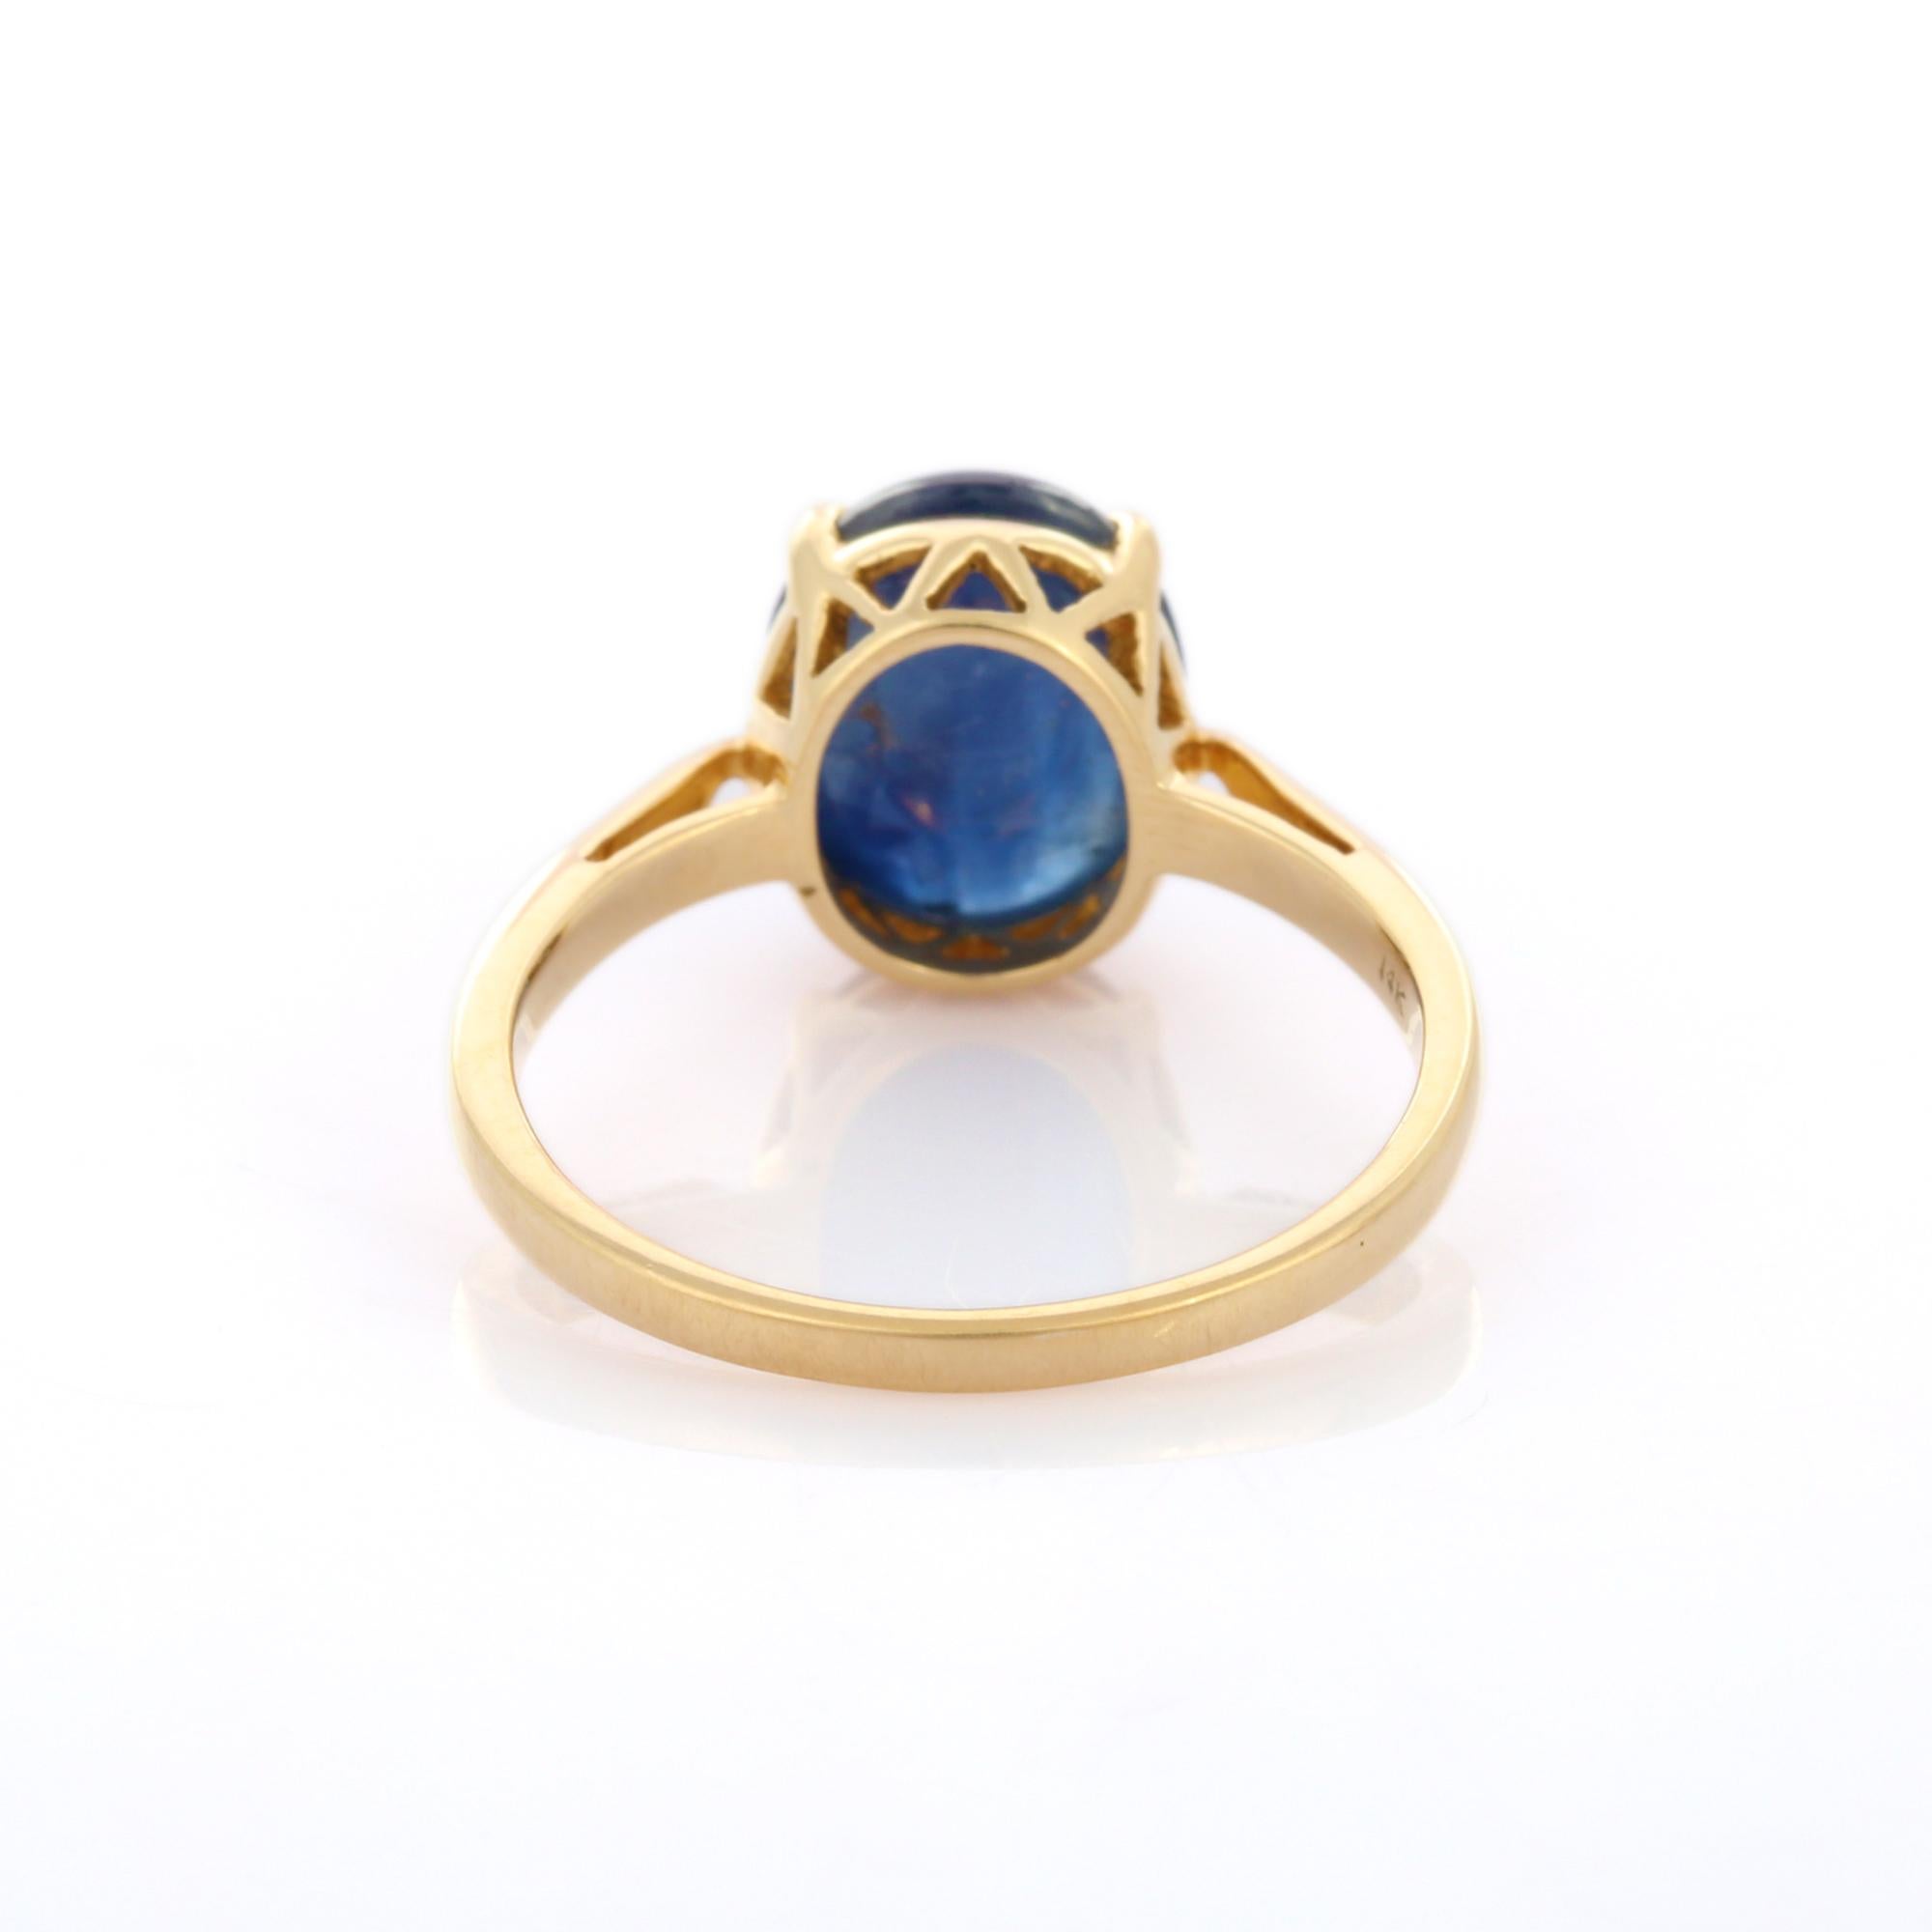 For Sale:  4.33 Carat Blue Sapphire Big Gemstone Ring in 14K Yellow Gold 5